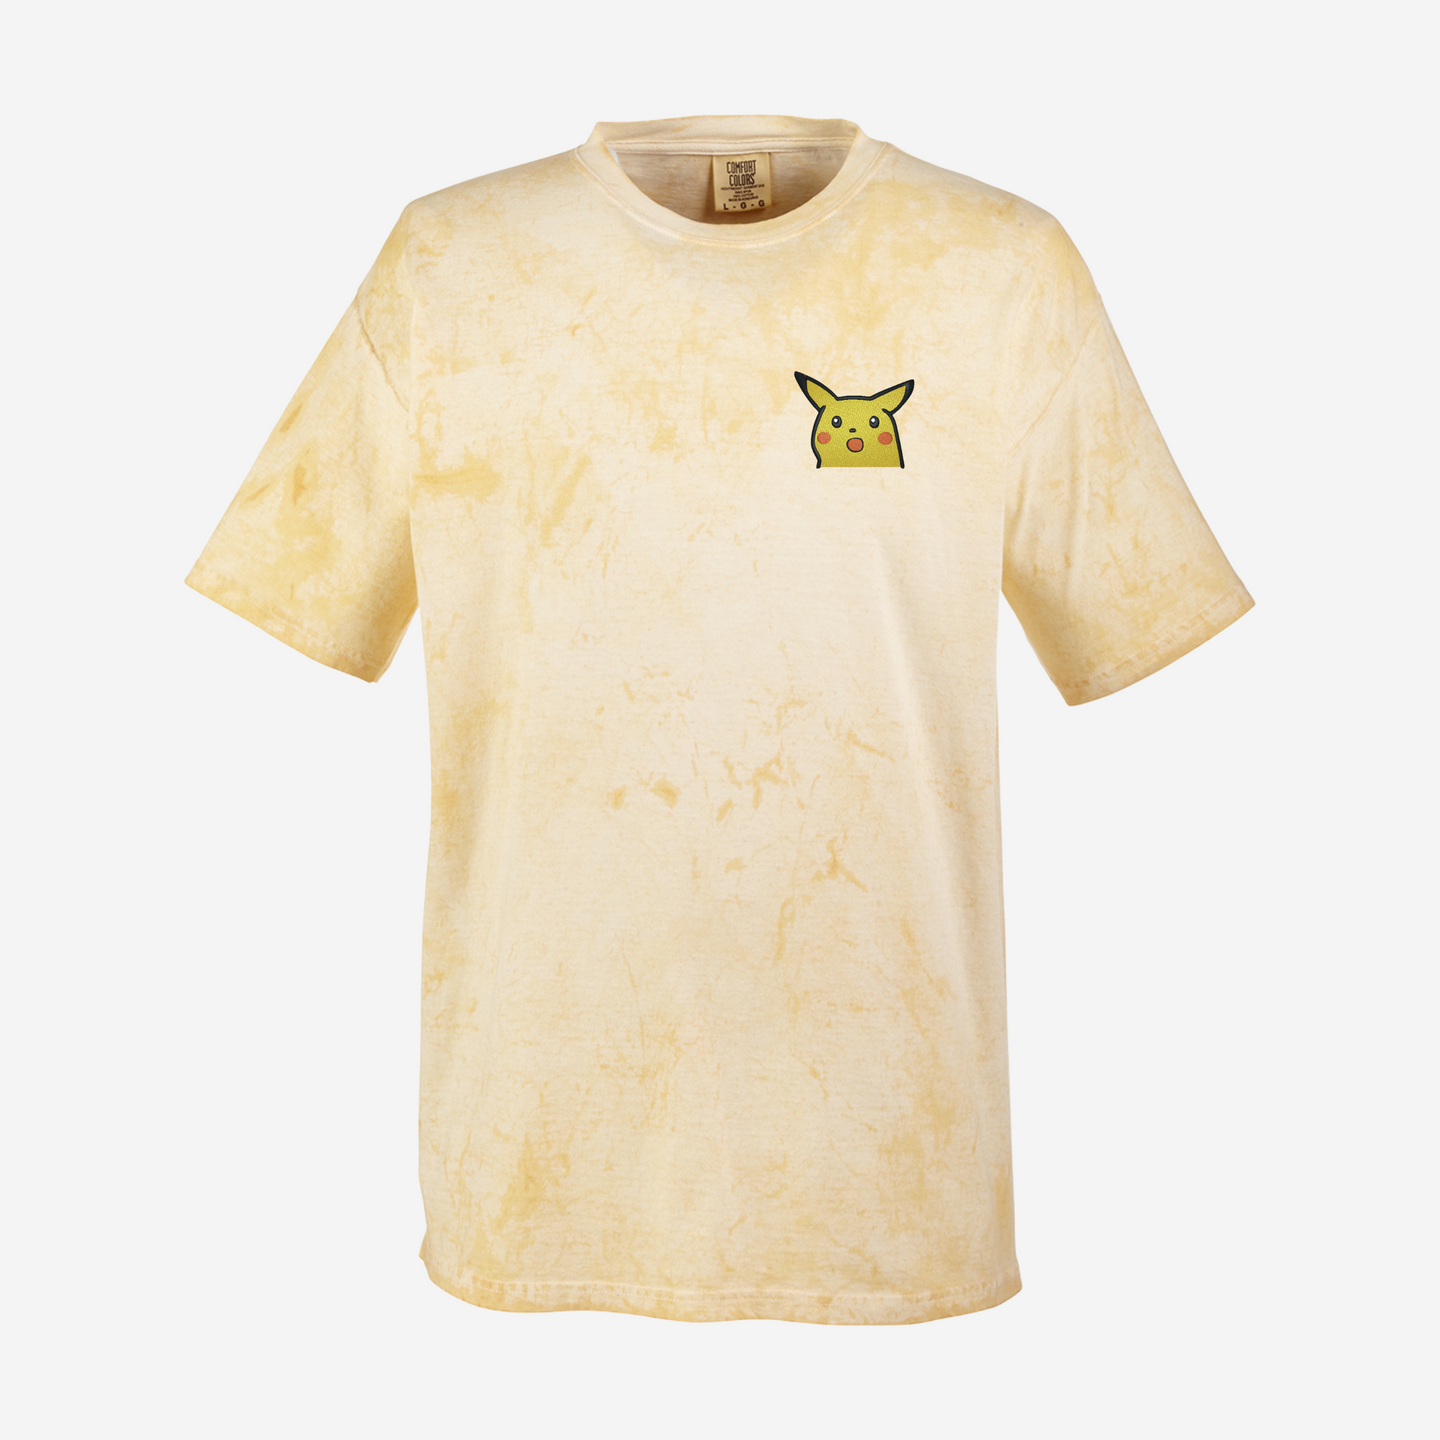 Surprised Pika Meme Embroidered T-Shirt